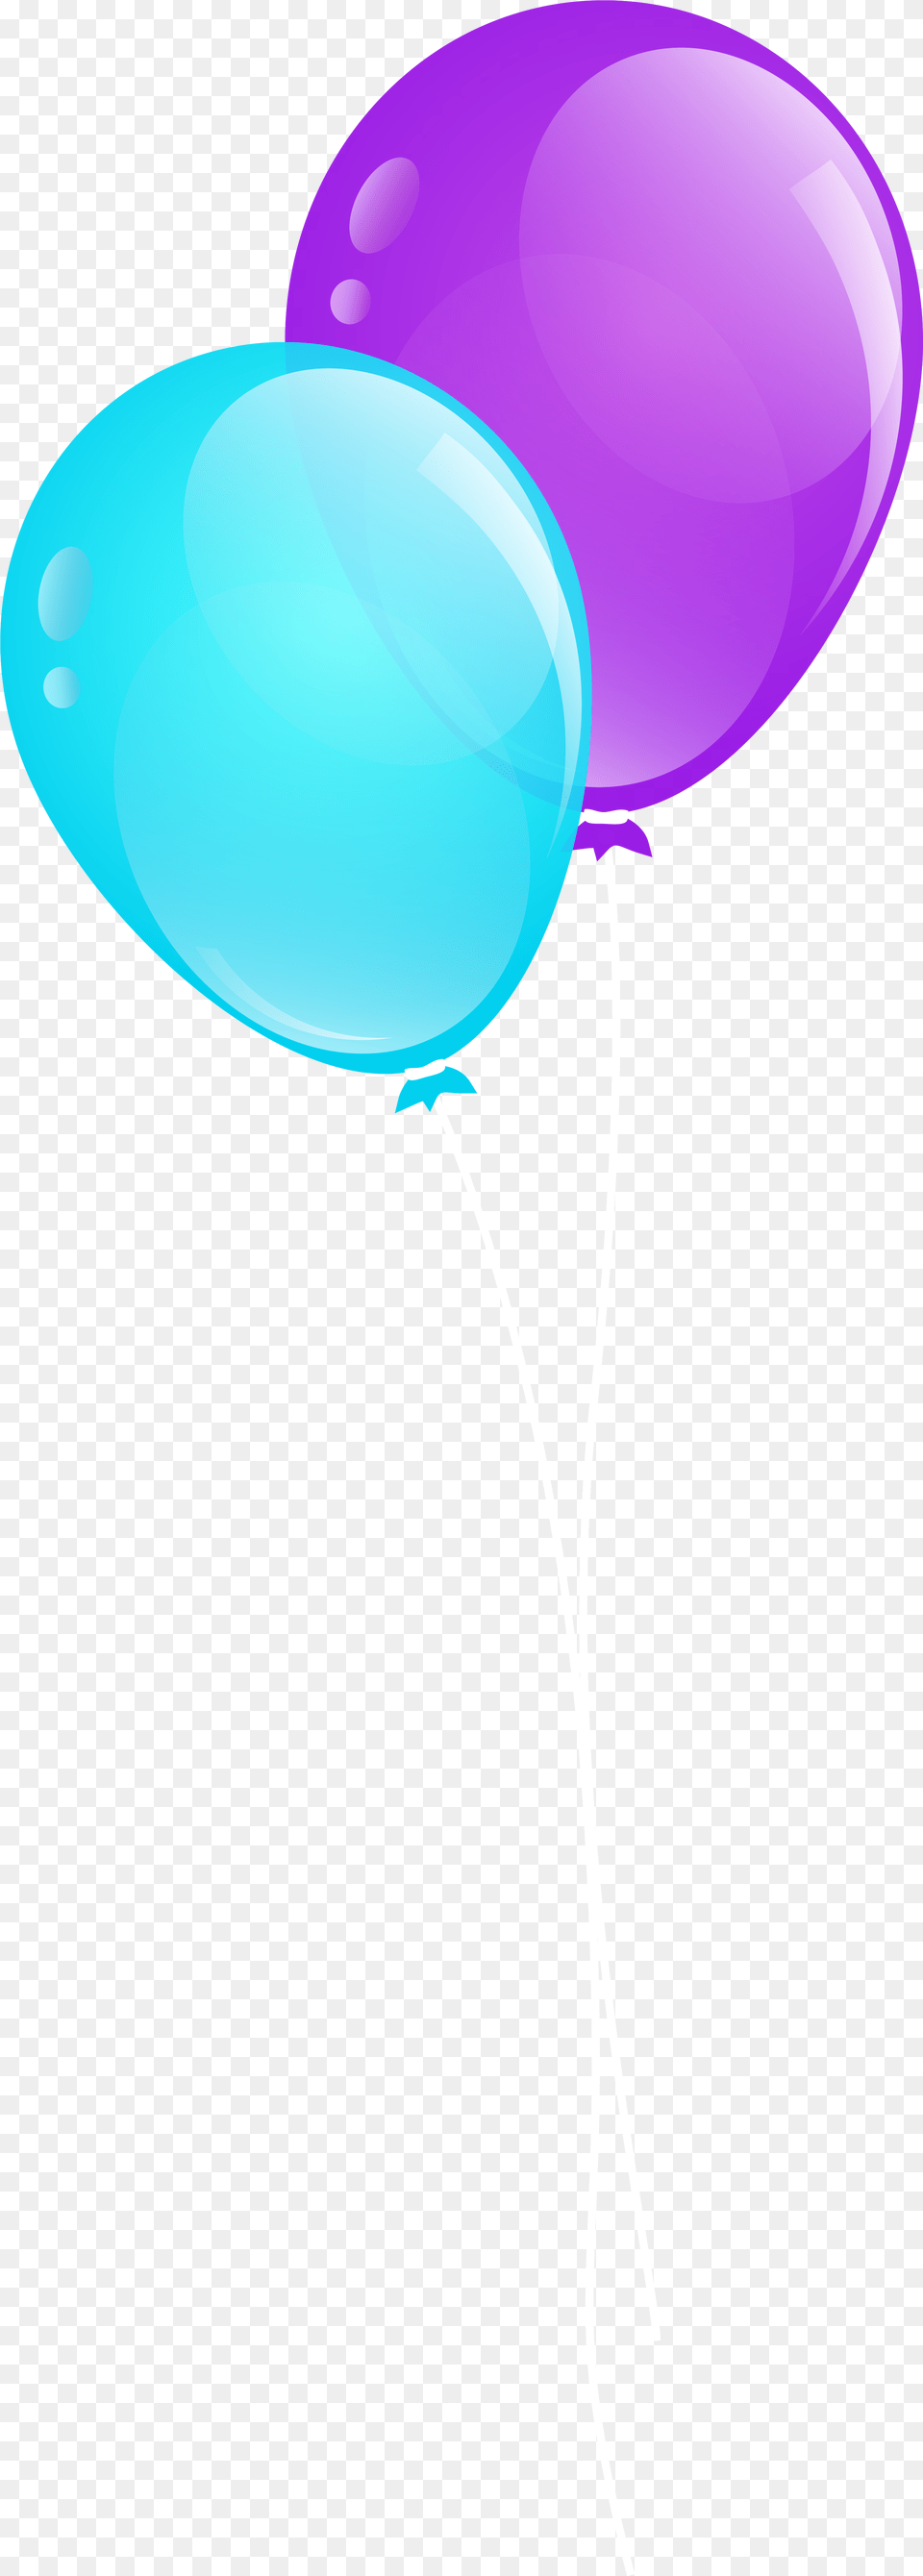 Blue And Purple Balloons Clip Art Image Purple And Blue Balloon Free Png